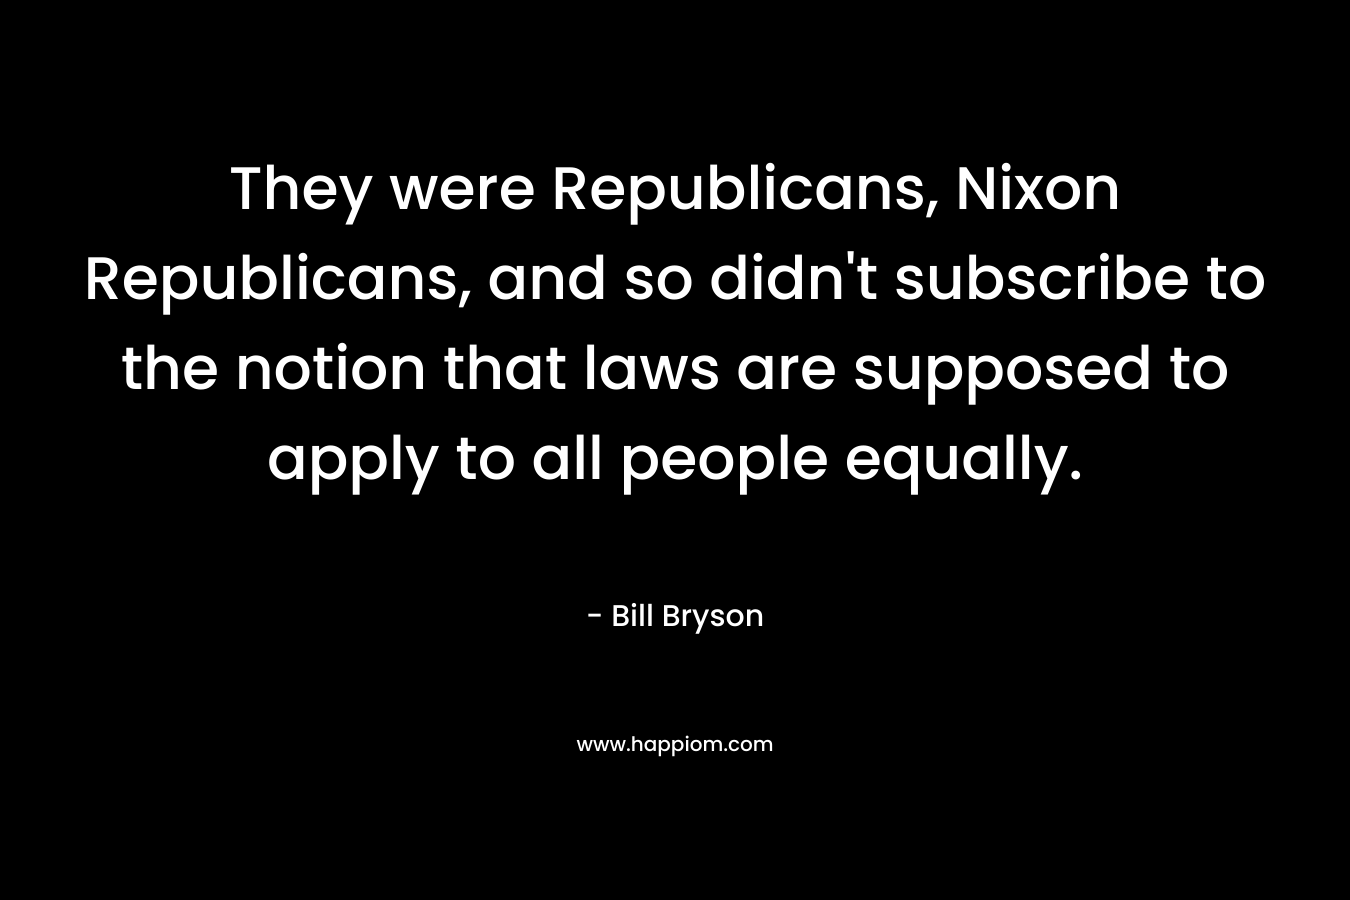 They were Republicans, Nixon Republicans, and so didn't subscribe to the notion that laws are supposed to apply to all people equally.